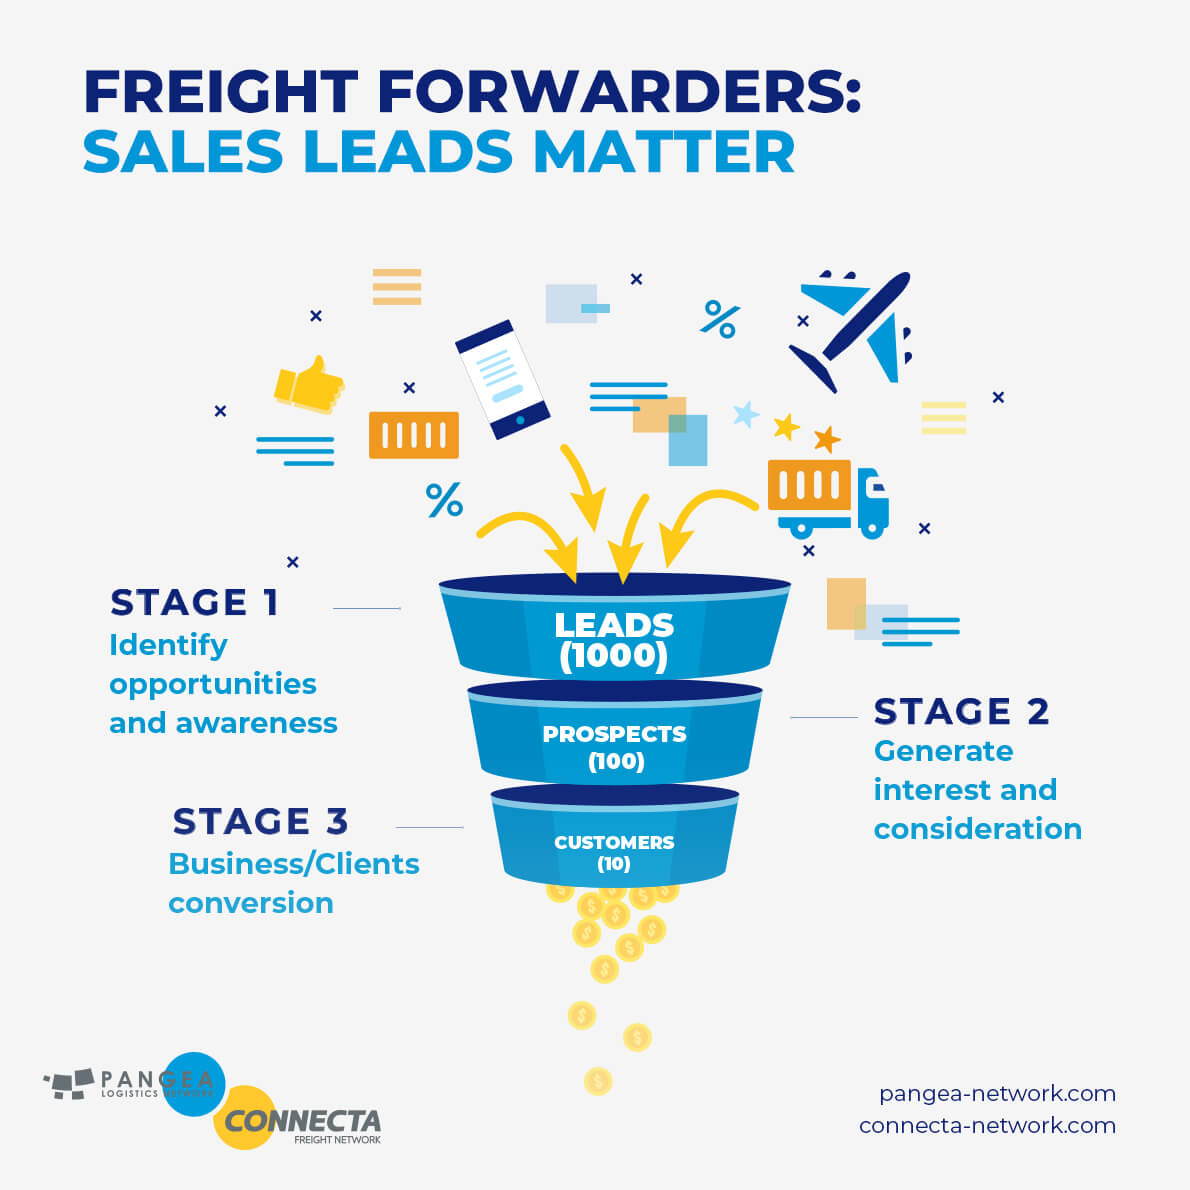 Unlocking Growth Opportunities: Why Taking Sales Leads Seriously is Vital for Freight Forwarders